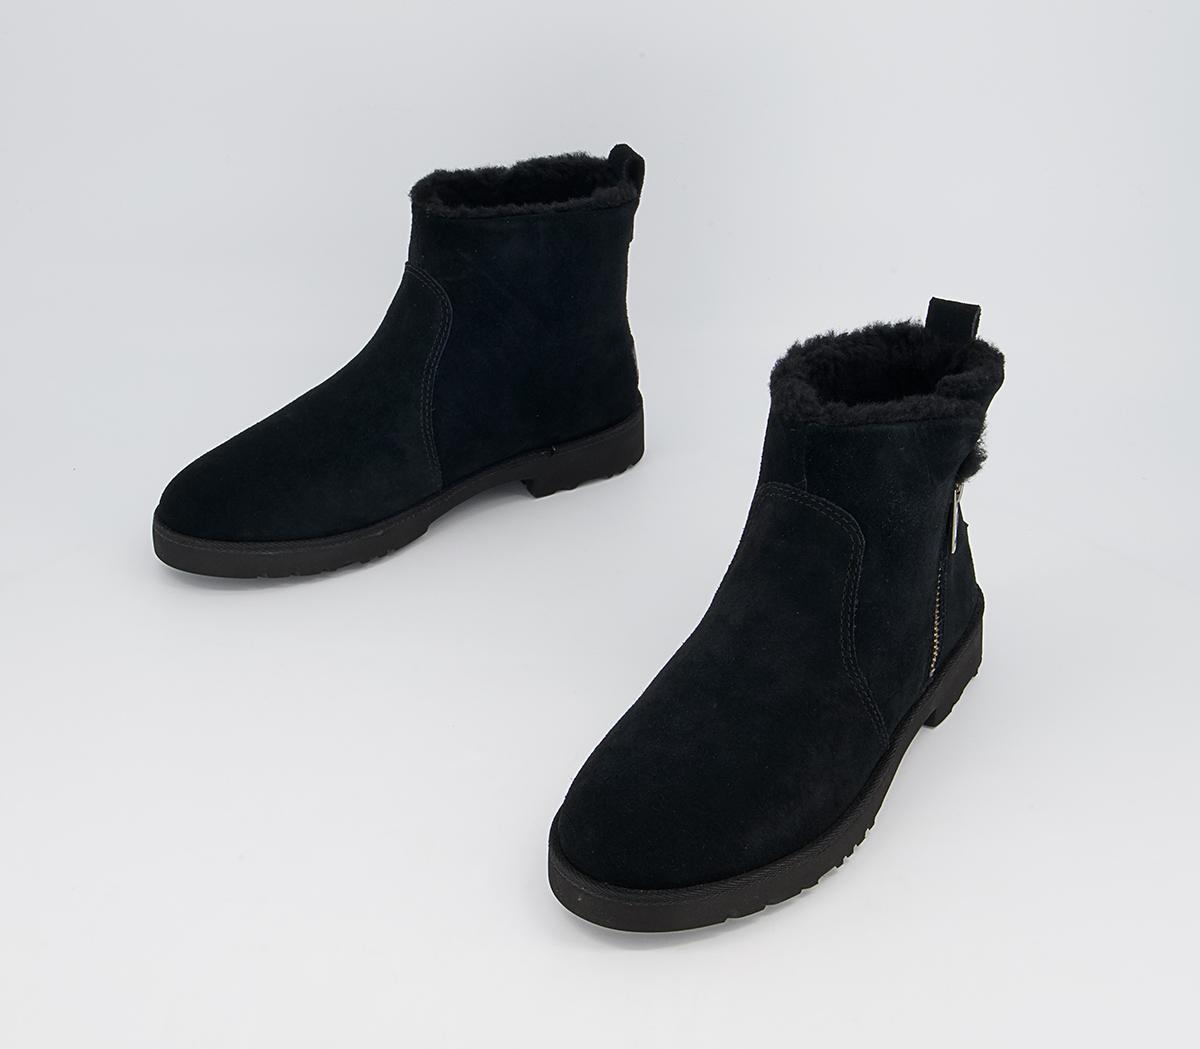 UGG Romely Zip Boots Black - Women's Ankle Boots